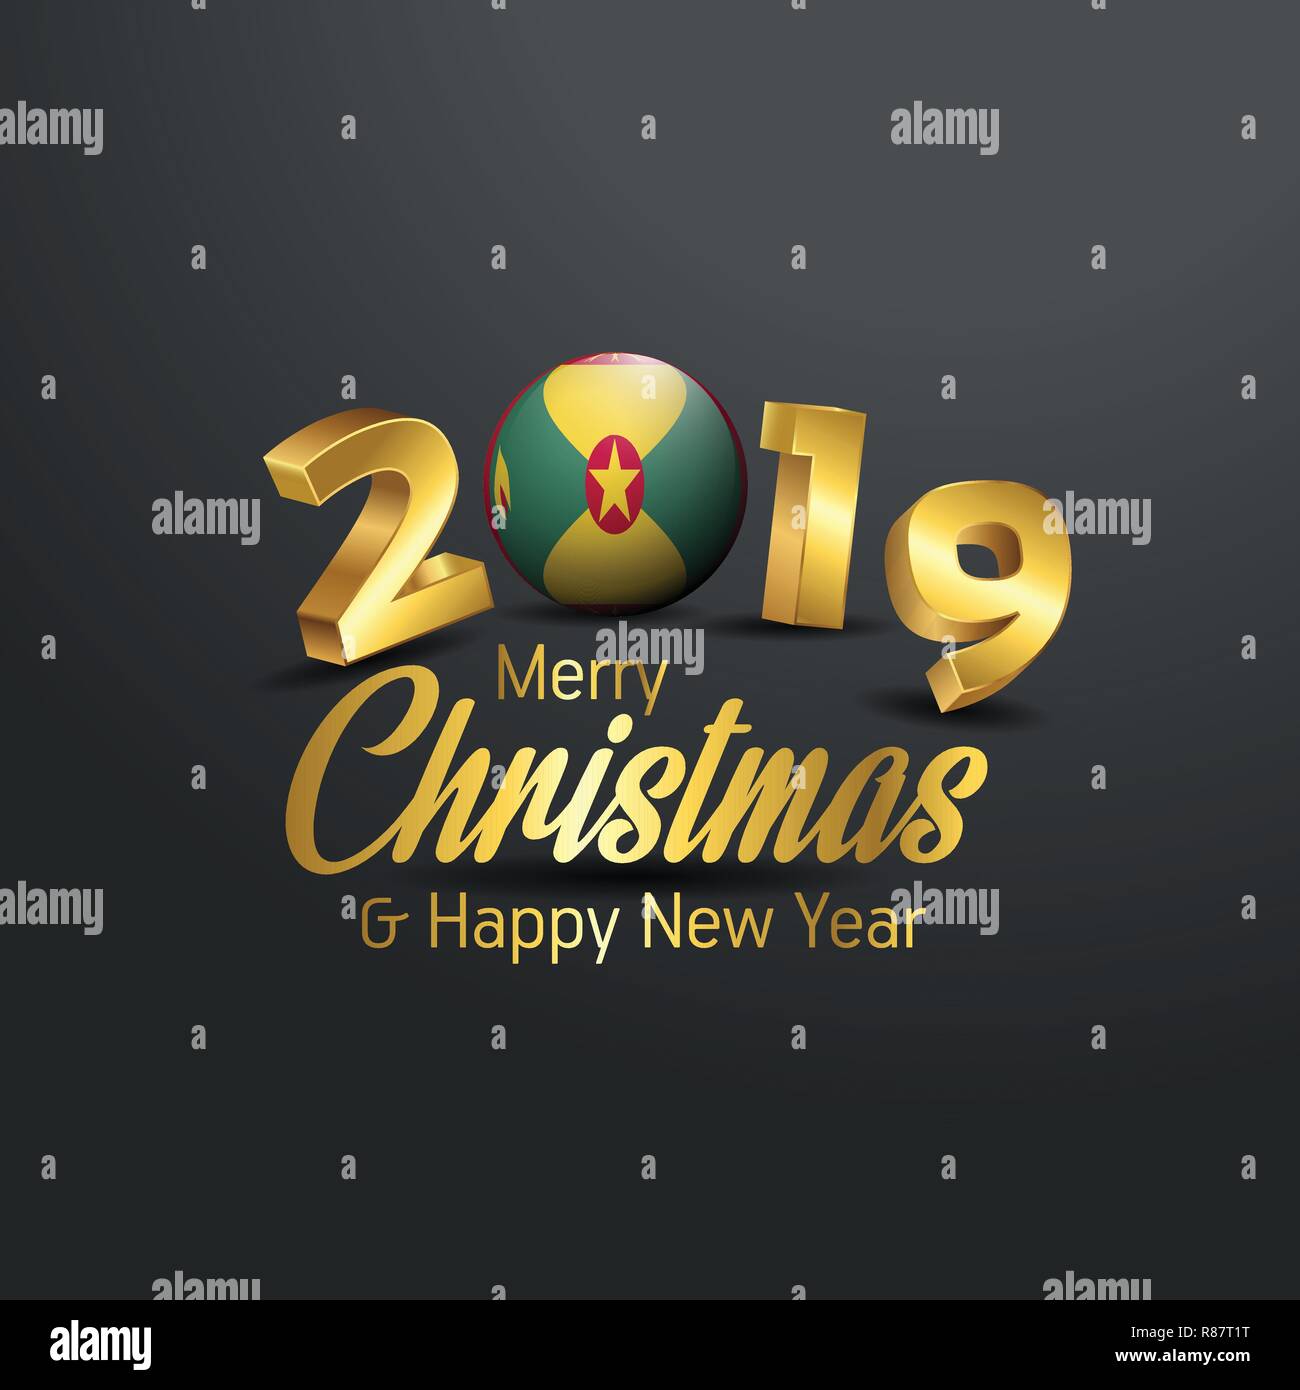 Grenada Flag 2019 Merry Christmas Typography. New Year Abstract Celebration background Stock Vector